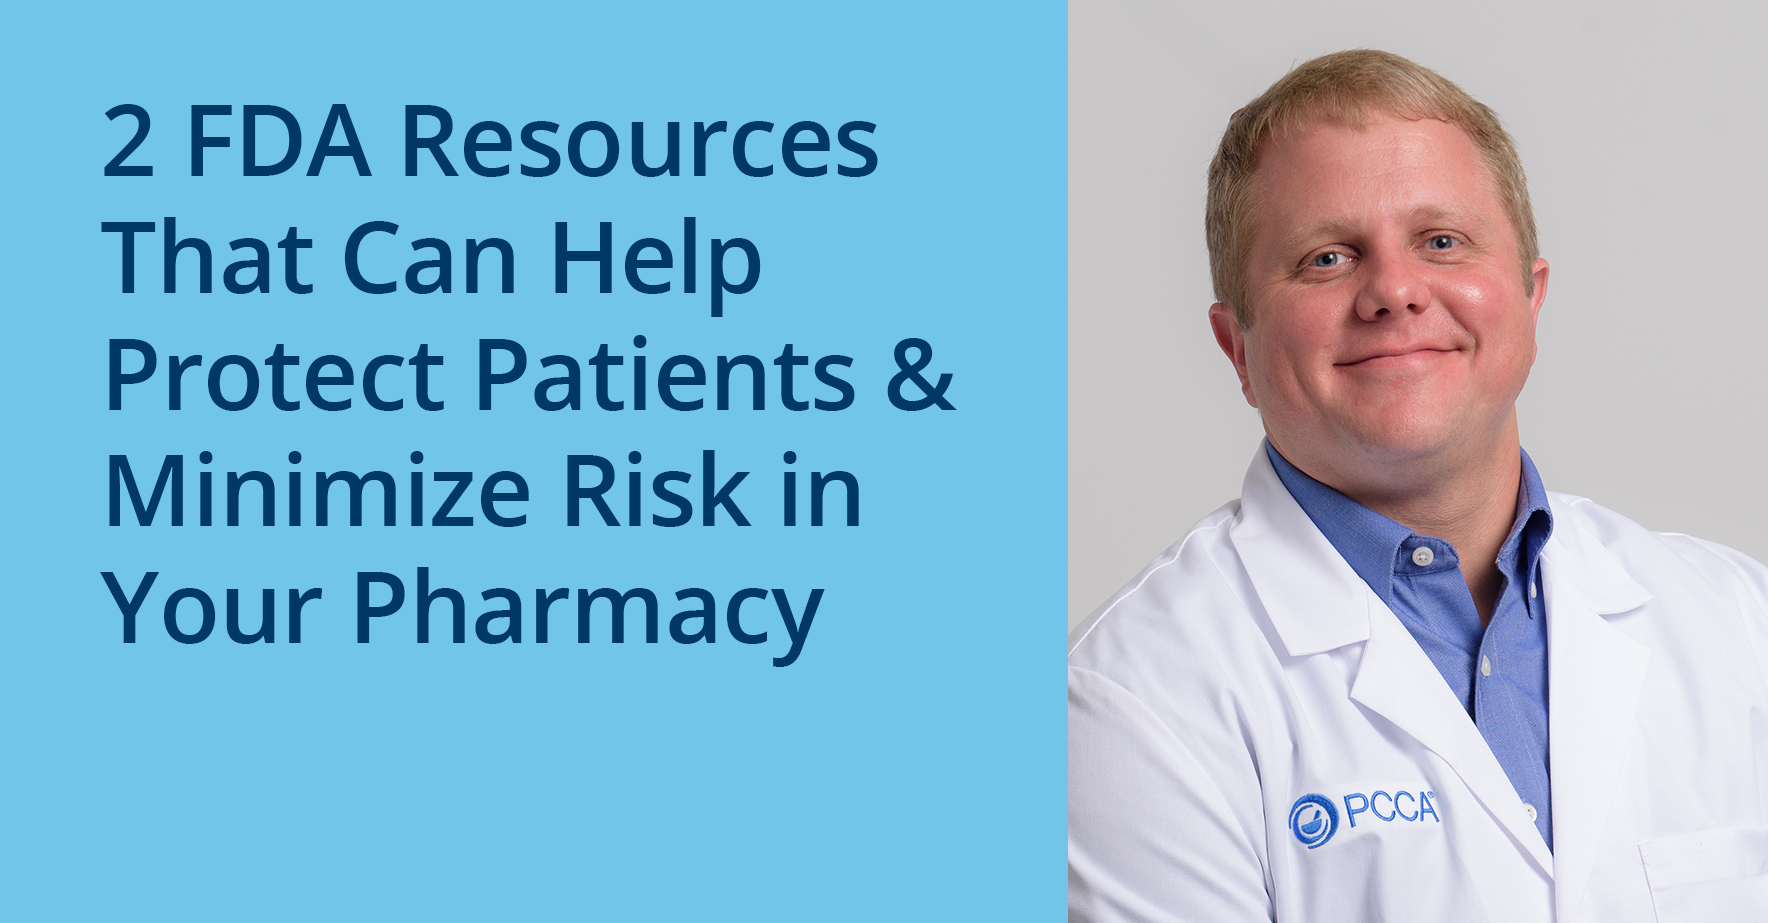 2_fda_resources_that_can_help_protect_patients_and_minimize_risk_in_your_pharmacy.jpg.jpg.